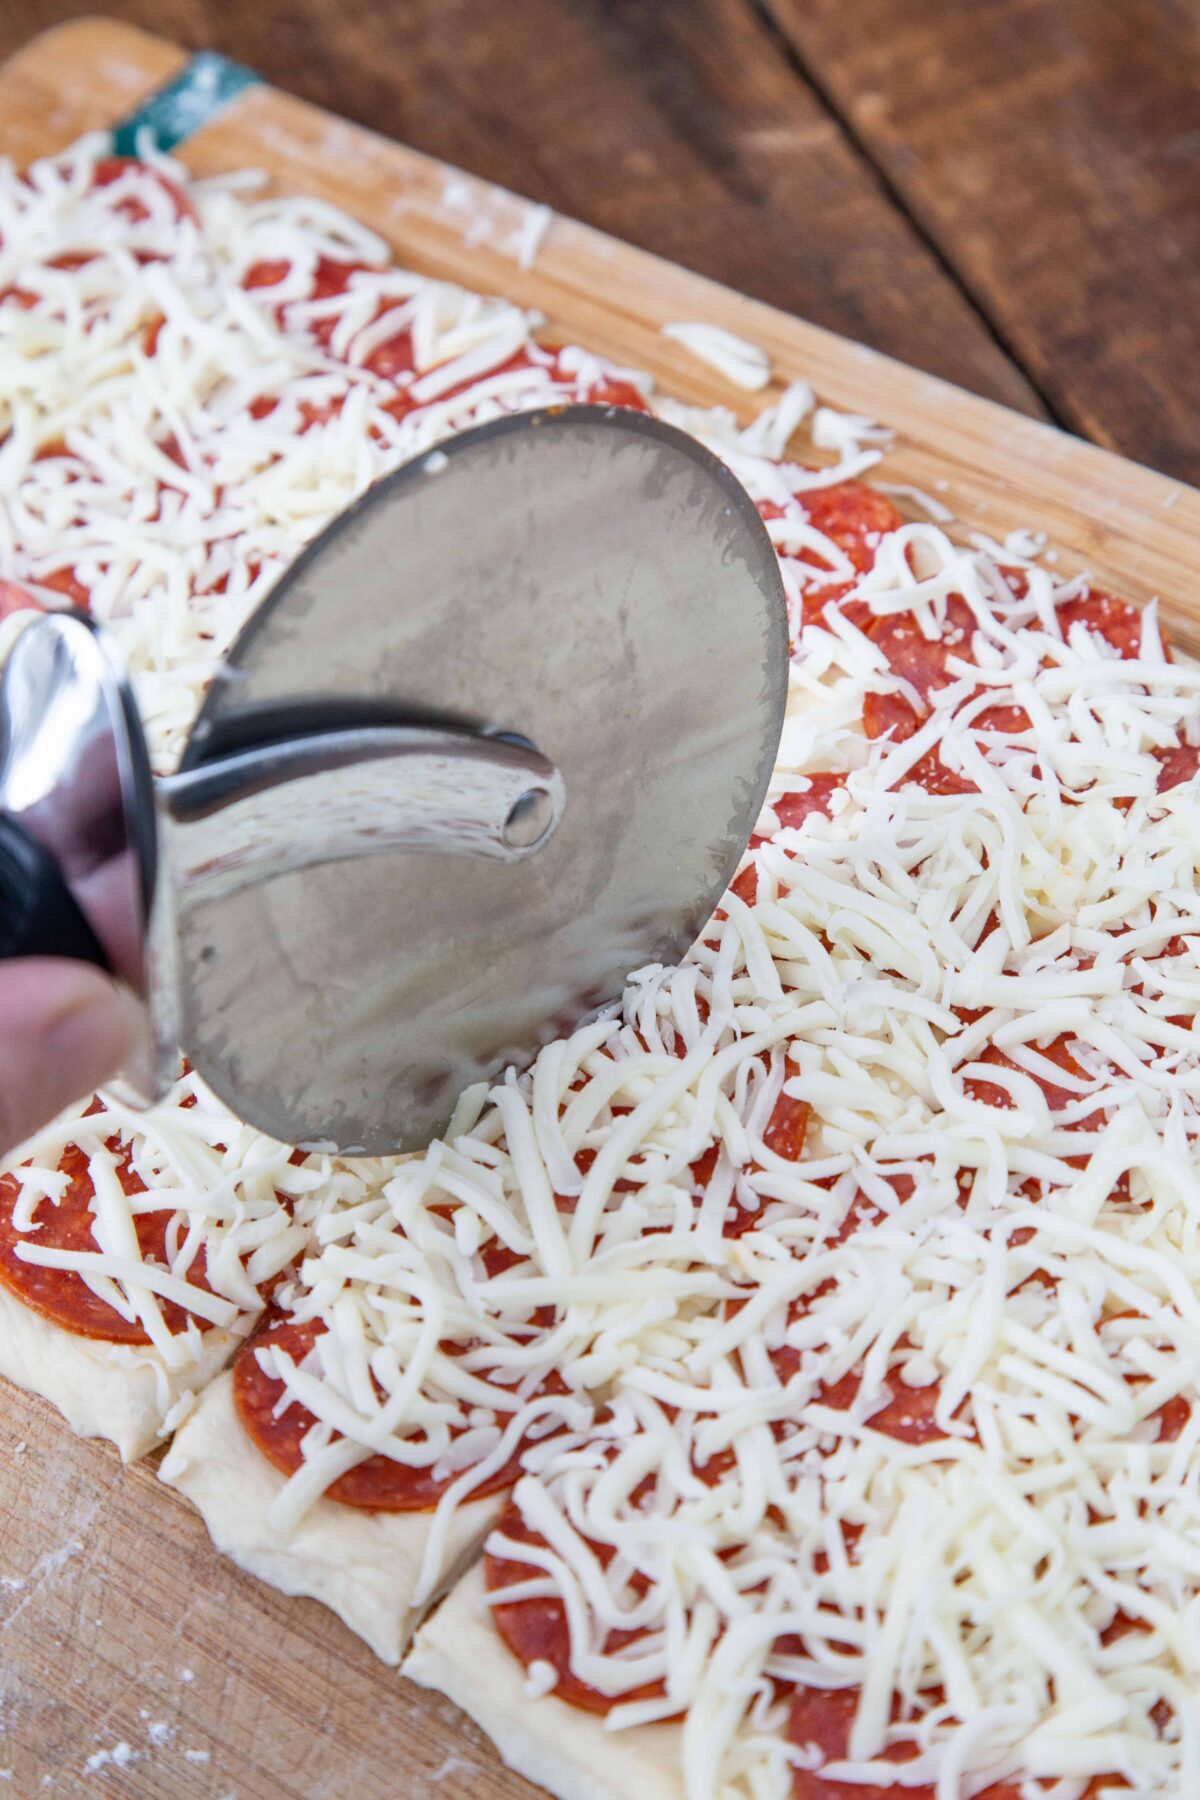 pizza wheel cutting through pizza dough topped with pepperoni and cheese.